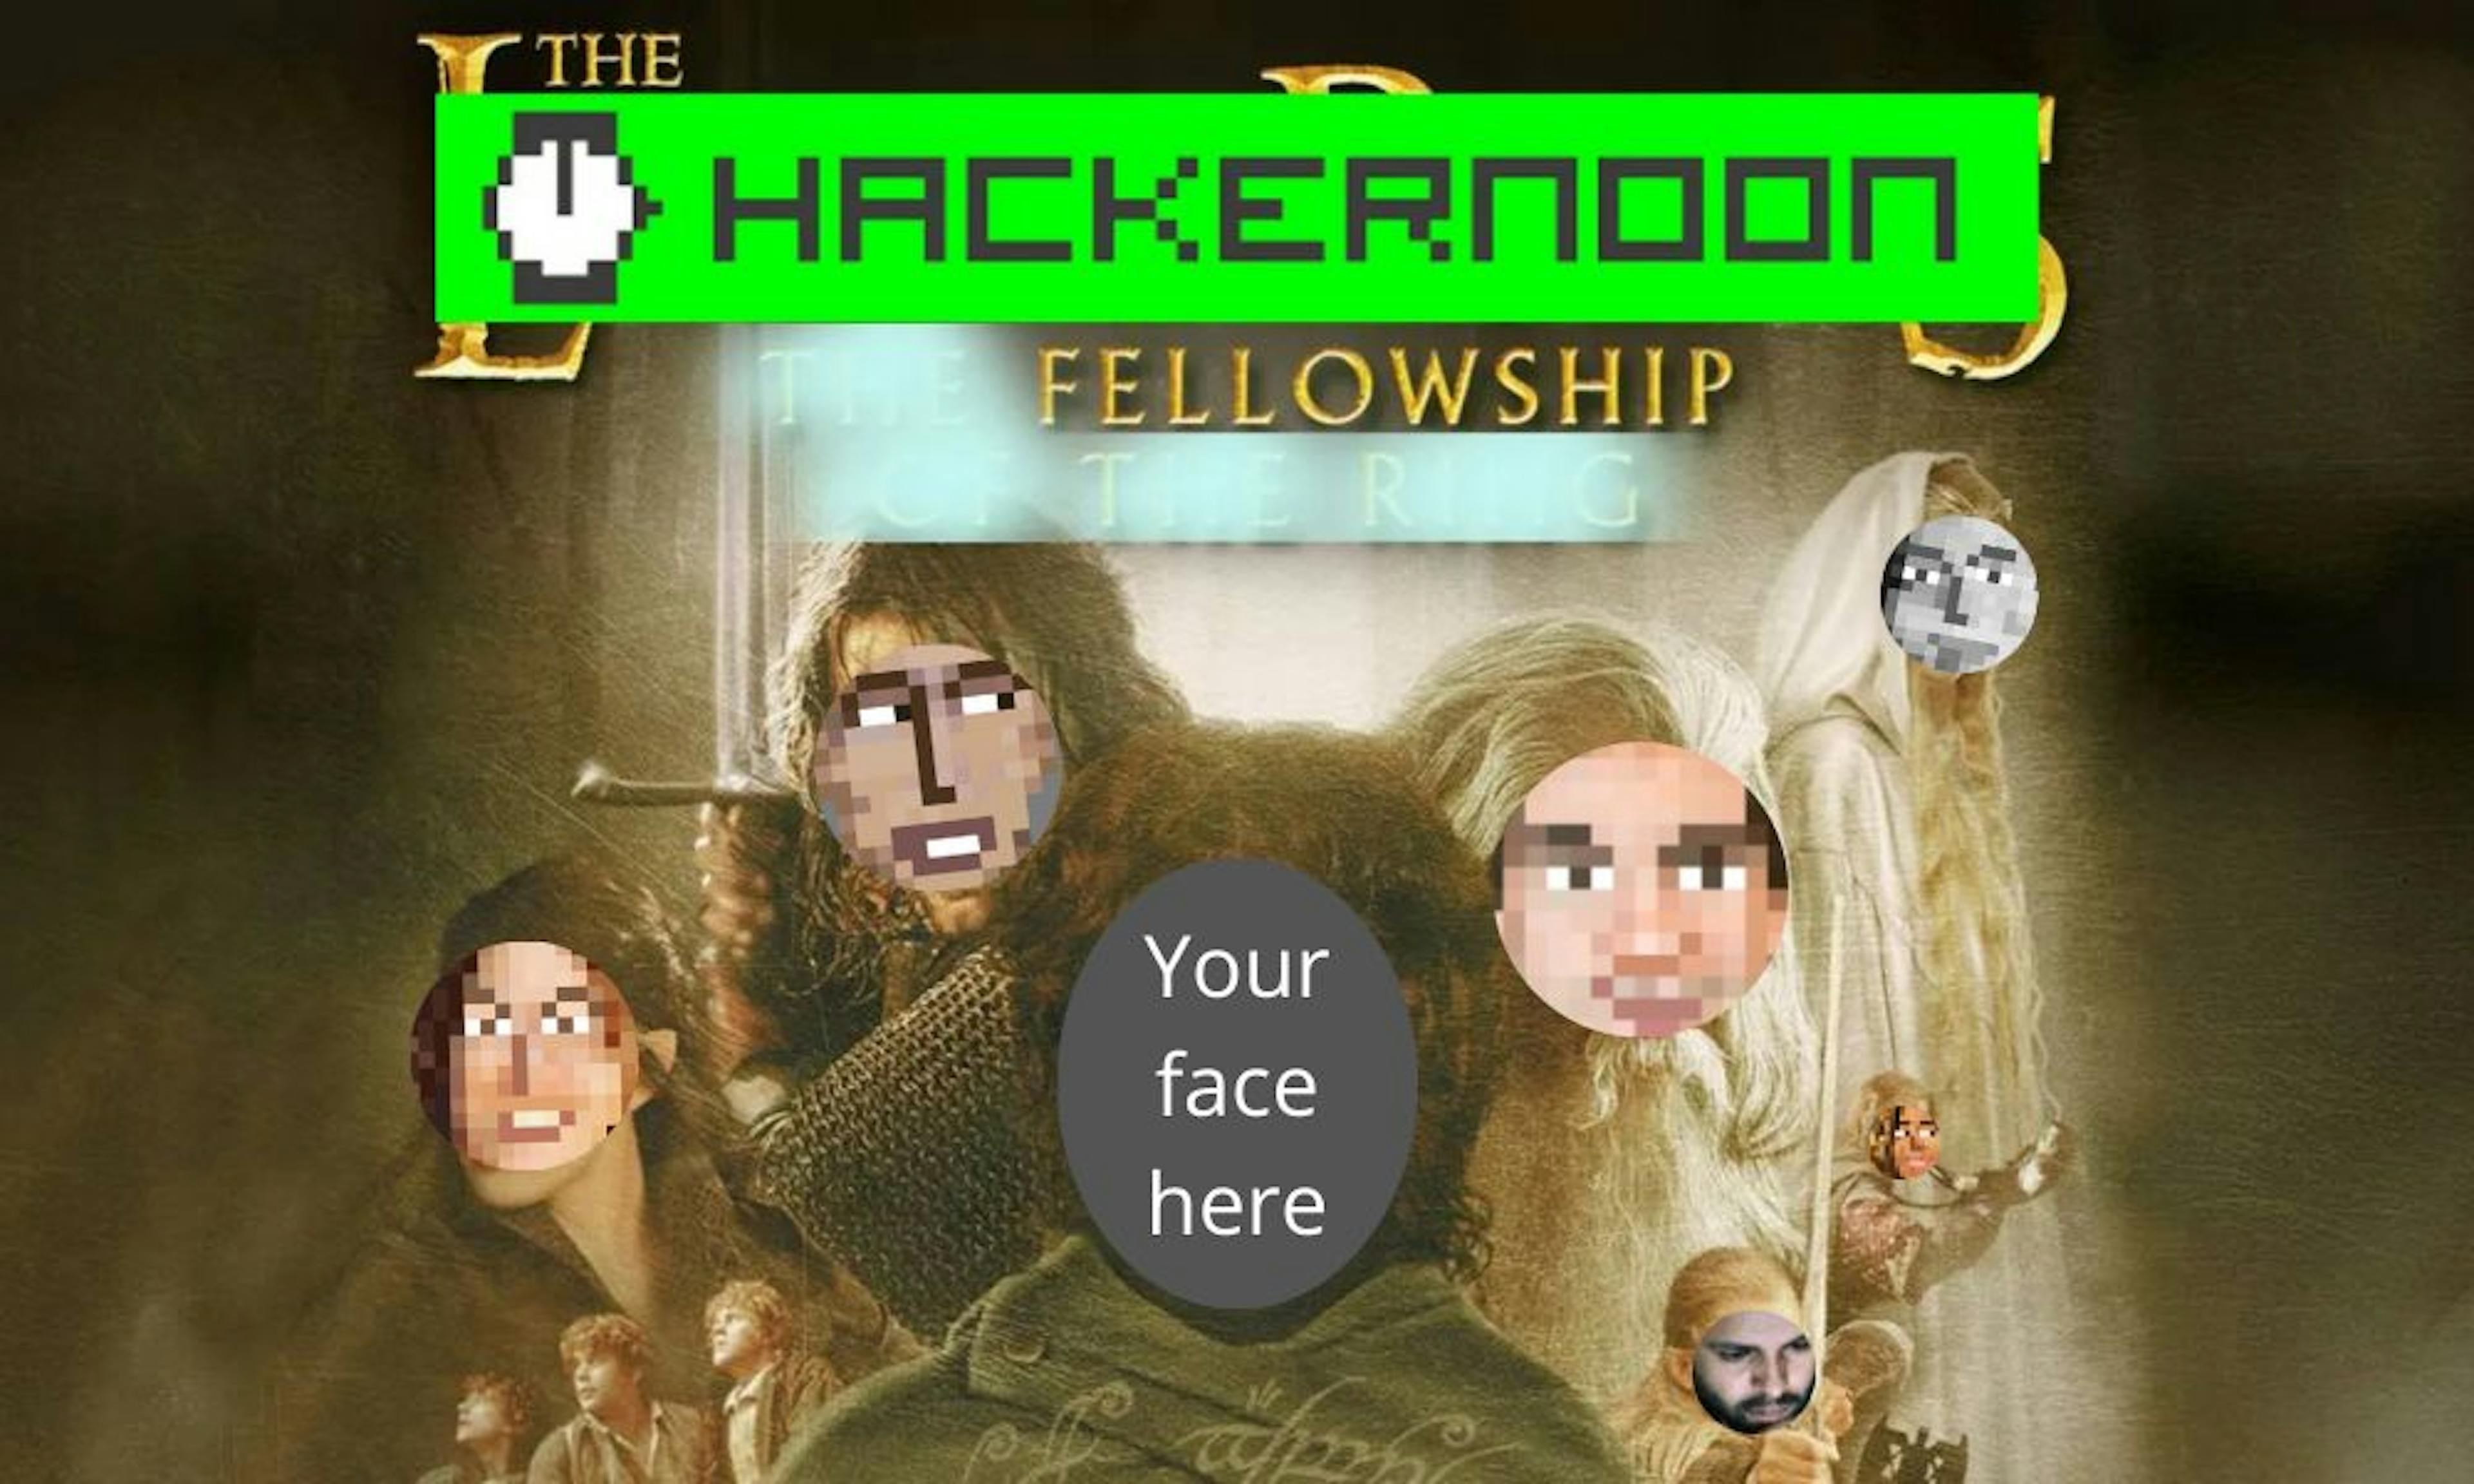 /introducing-the-hackernoon-blogging-fellowship-9g1d37cn feature image